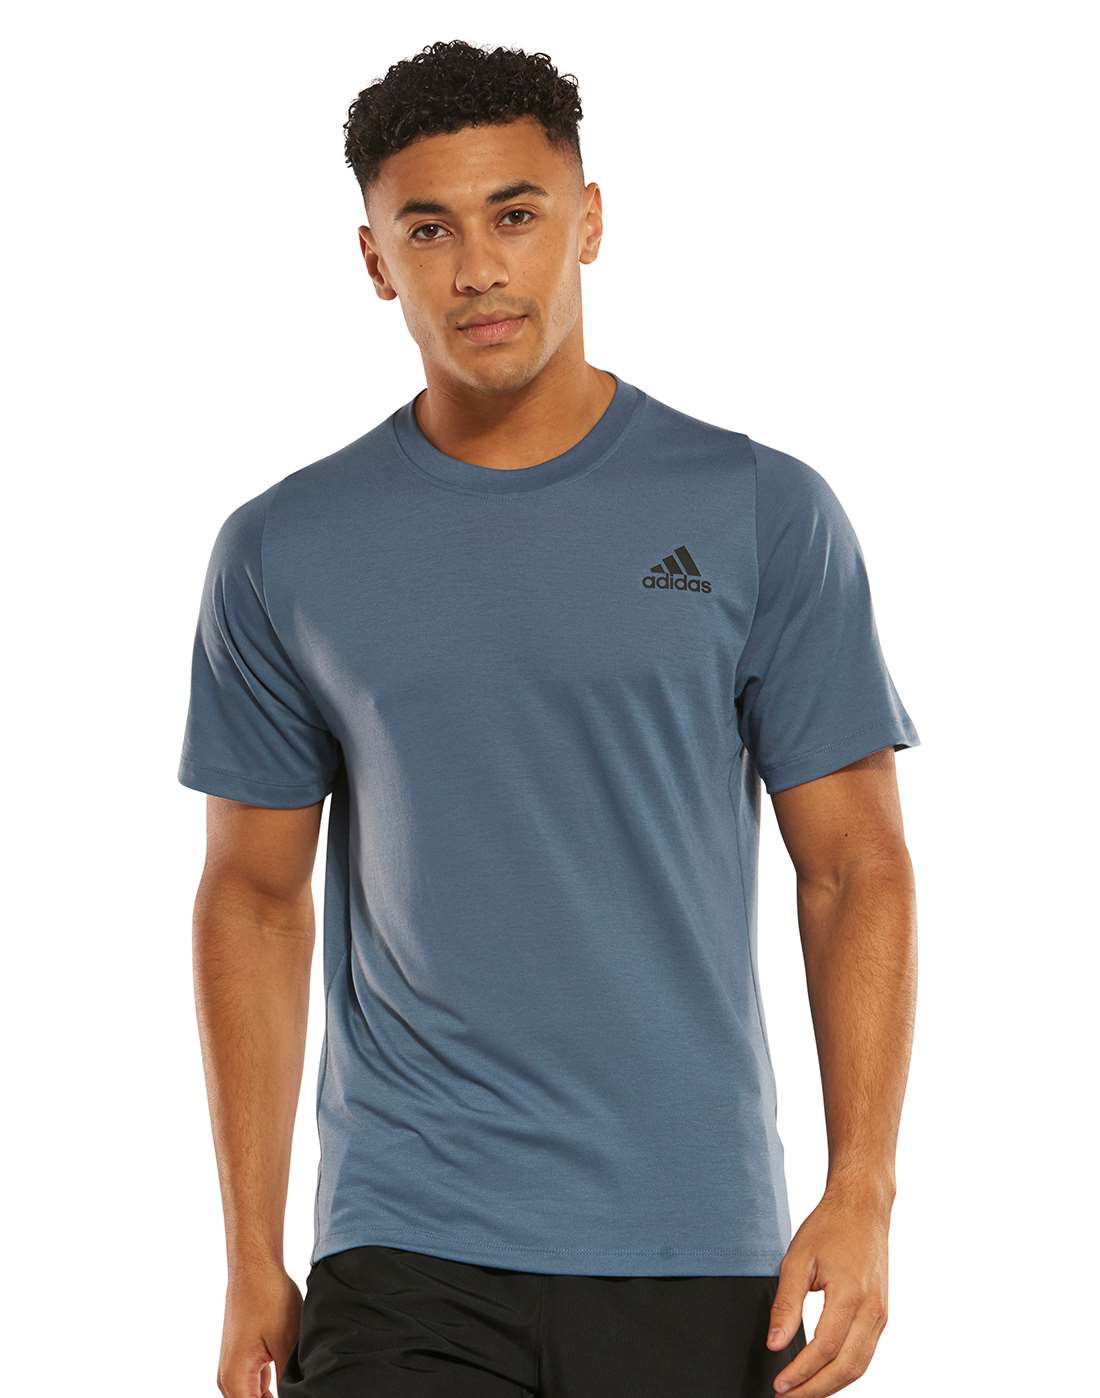 Adidas Climalite Round Neck Dry Fit T Shirt